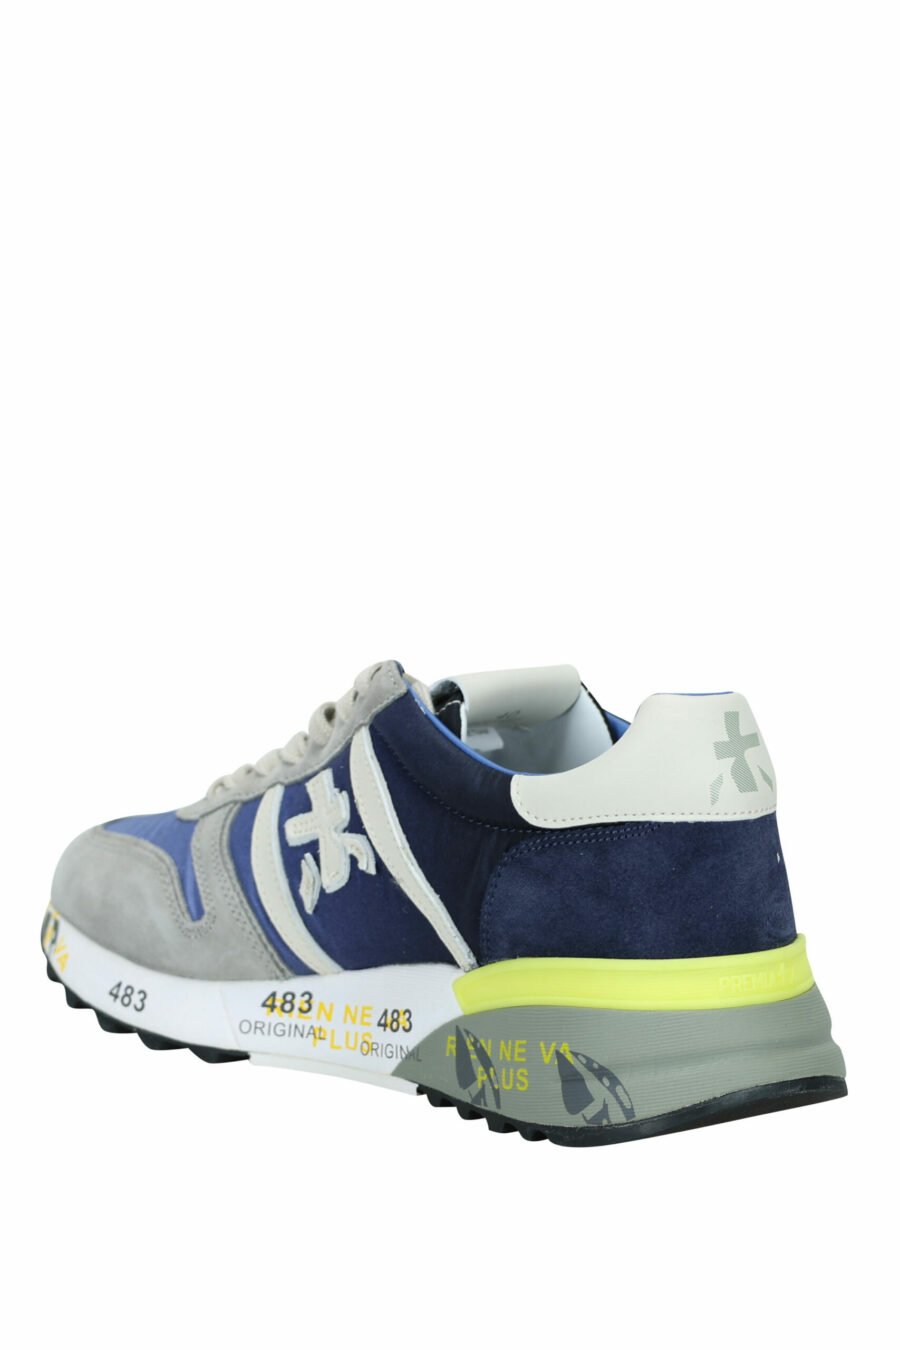 Blue trainers in degradé with grey "Lander 4587" - 8058325170603 3 scaled